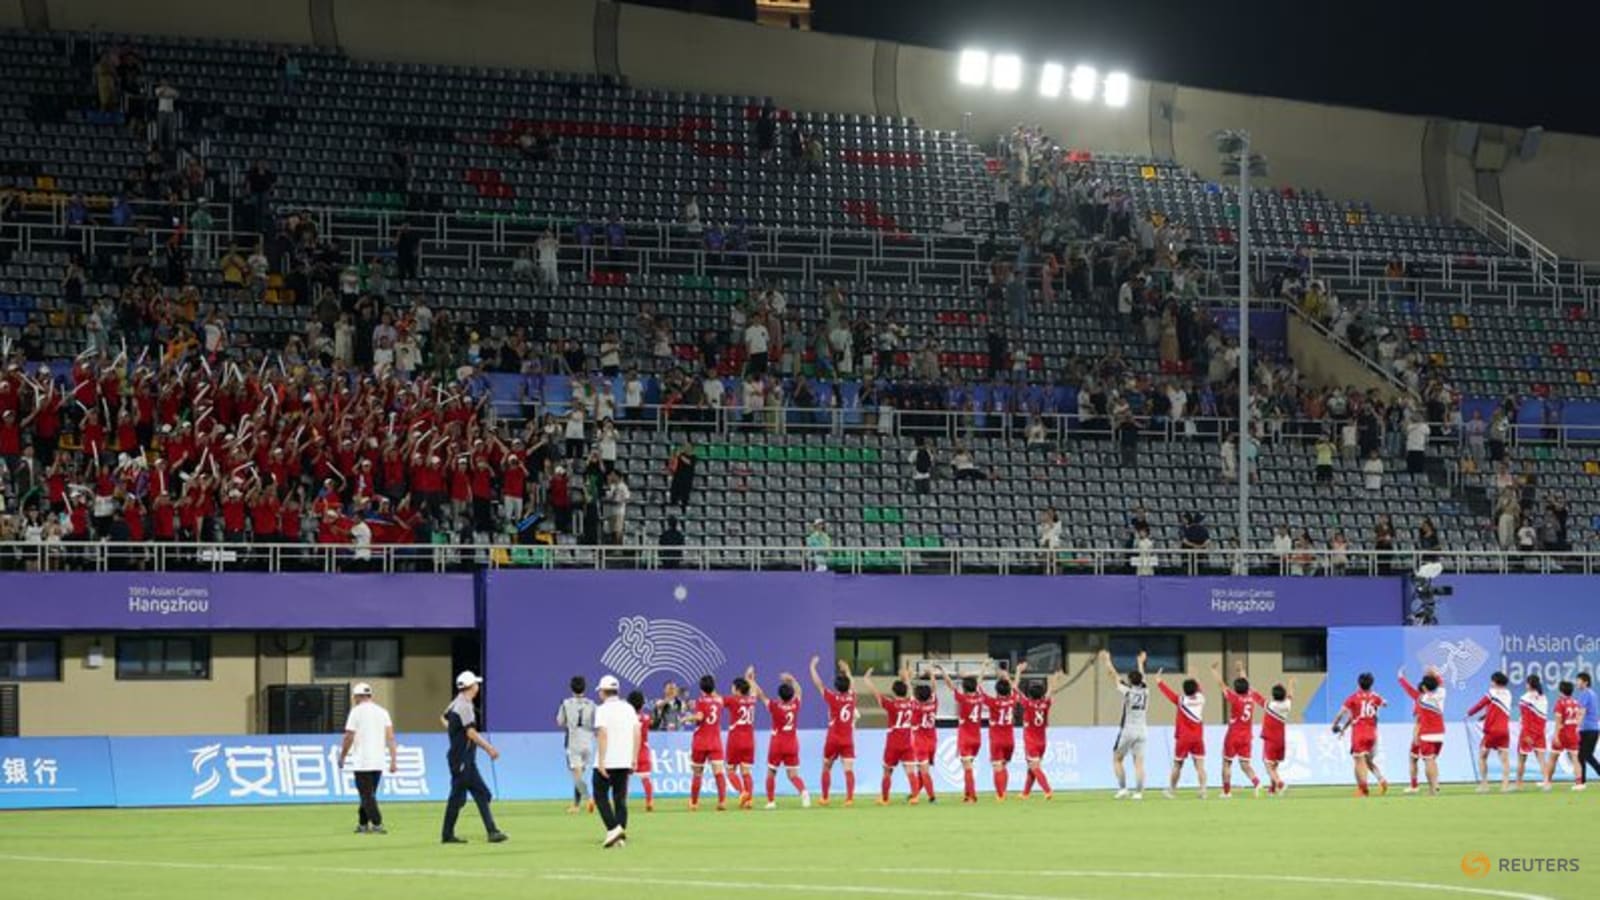 Games-Late burst gives North Korea big win over South in Asian Games soccer